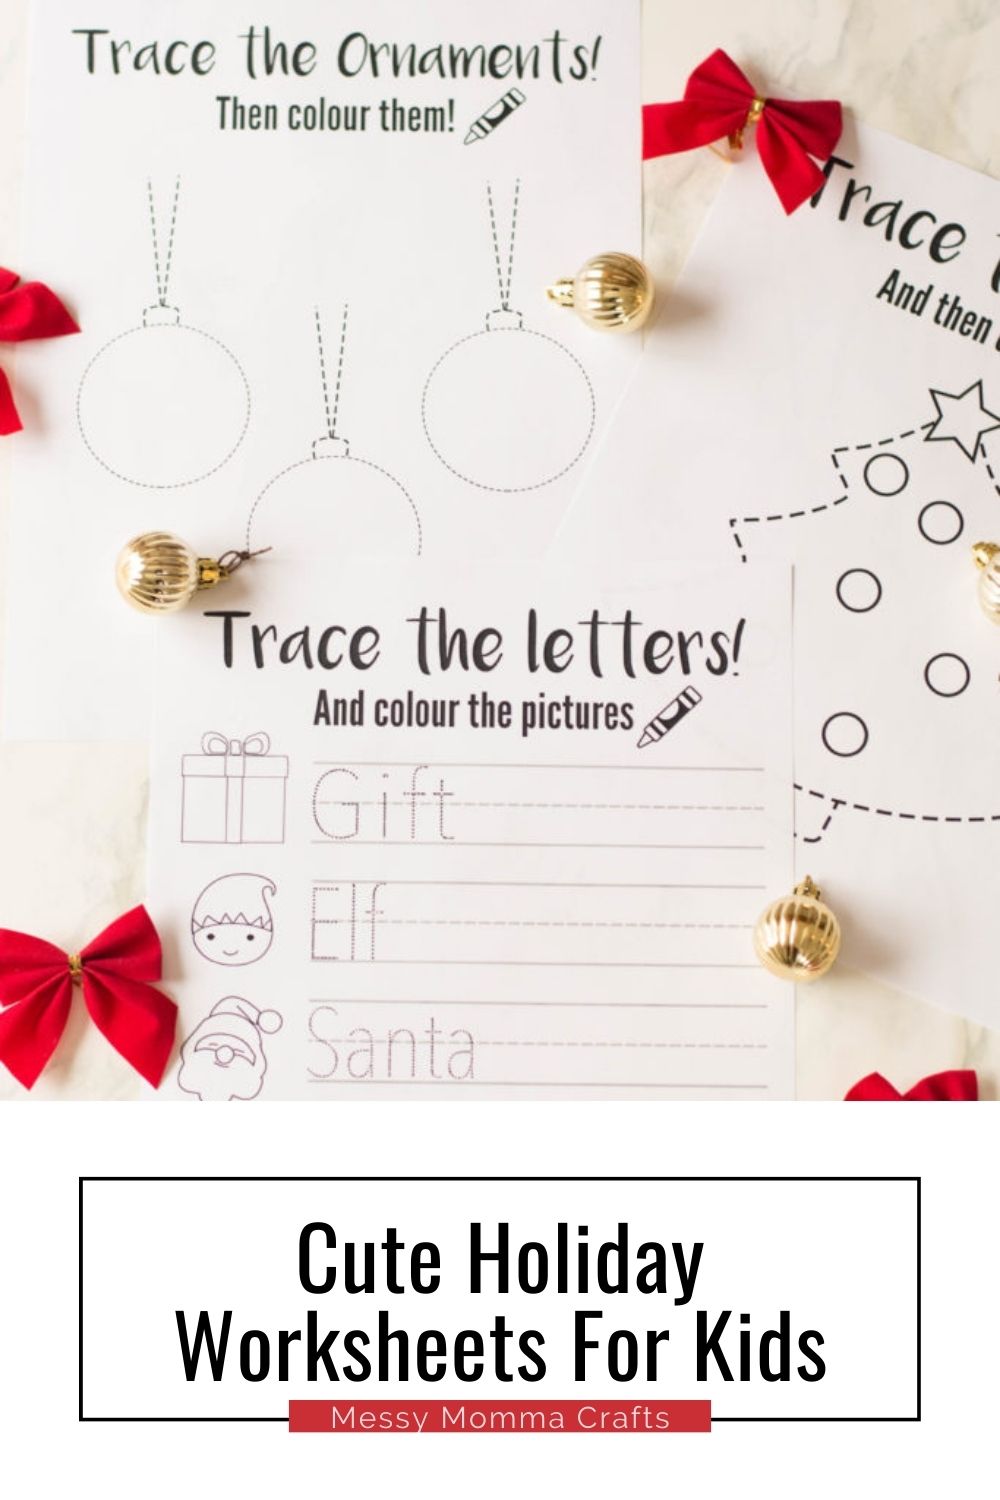 Cute holiday worksheets for kids.